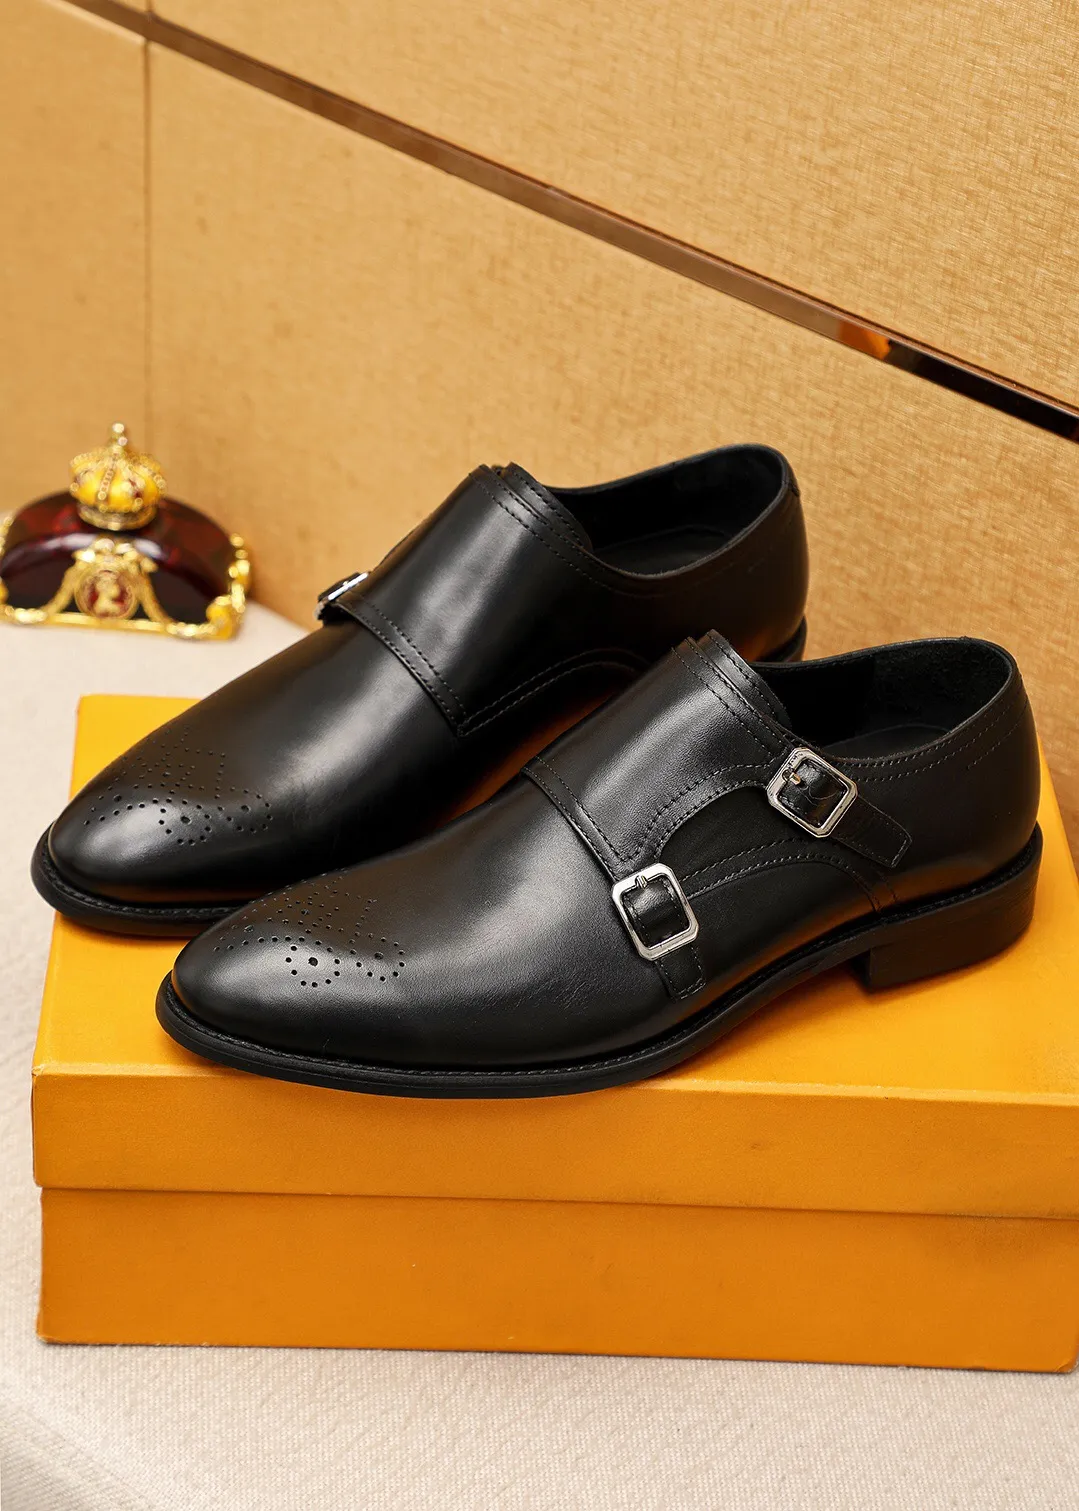 2023 Mens Dress Shoes Designer Fashion Genuine Leather Business Office Work Formal Loafers Male Brand Designer Party Wedding Flats Size 38-46